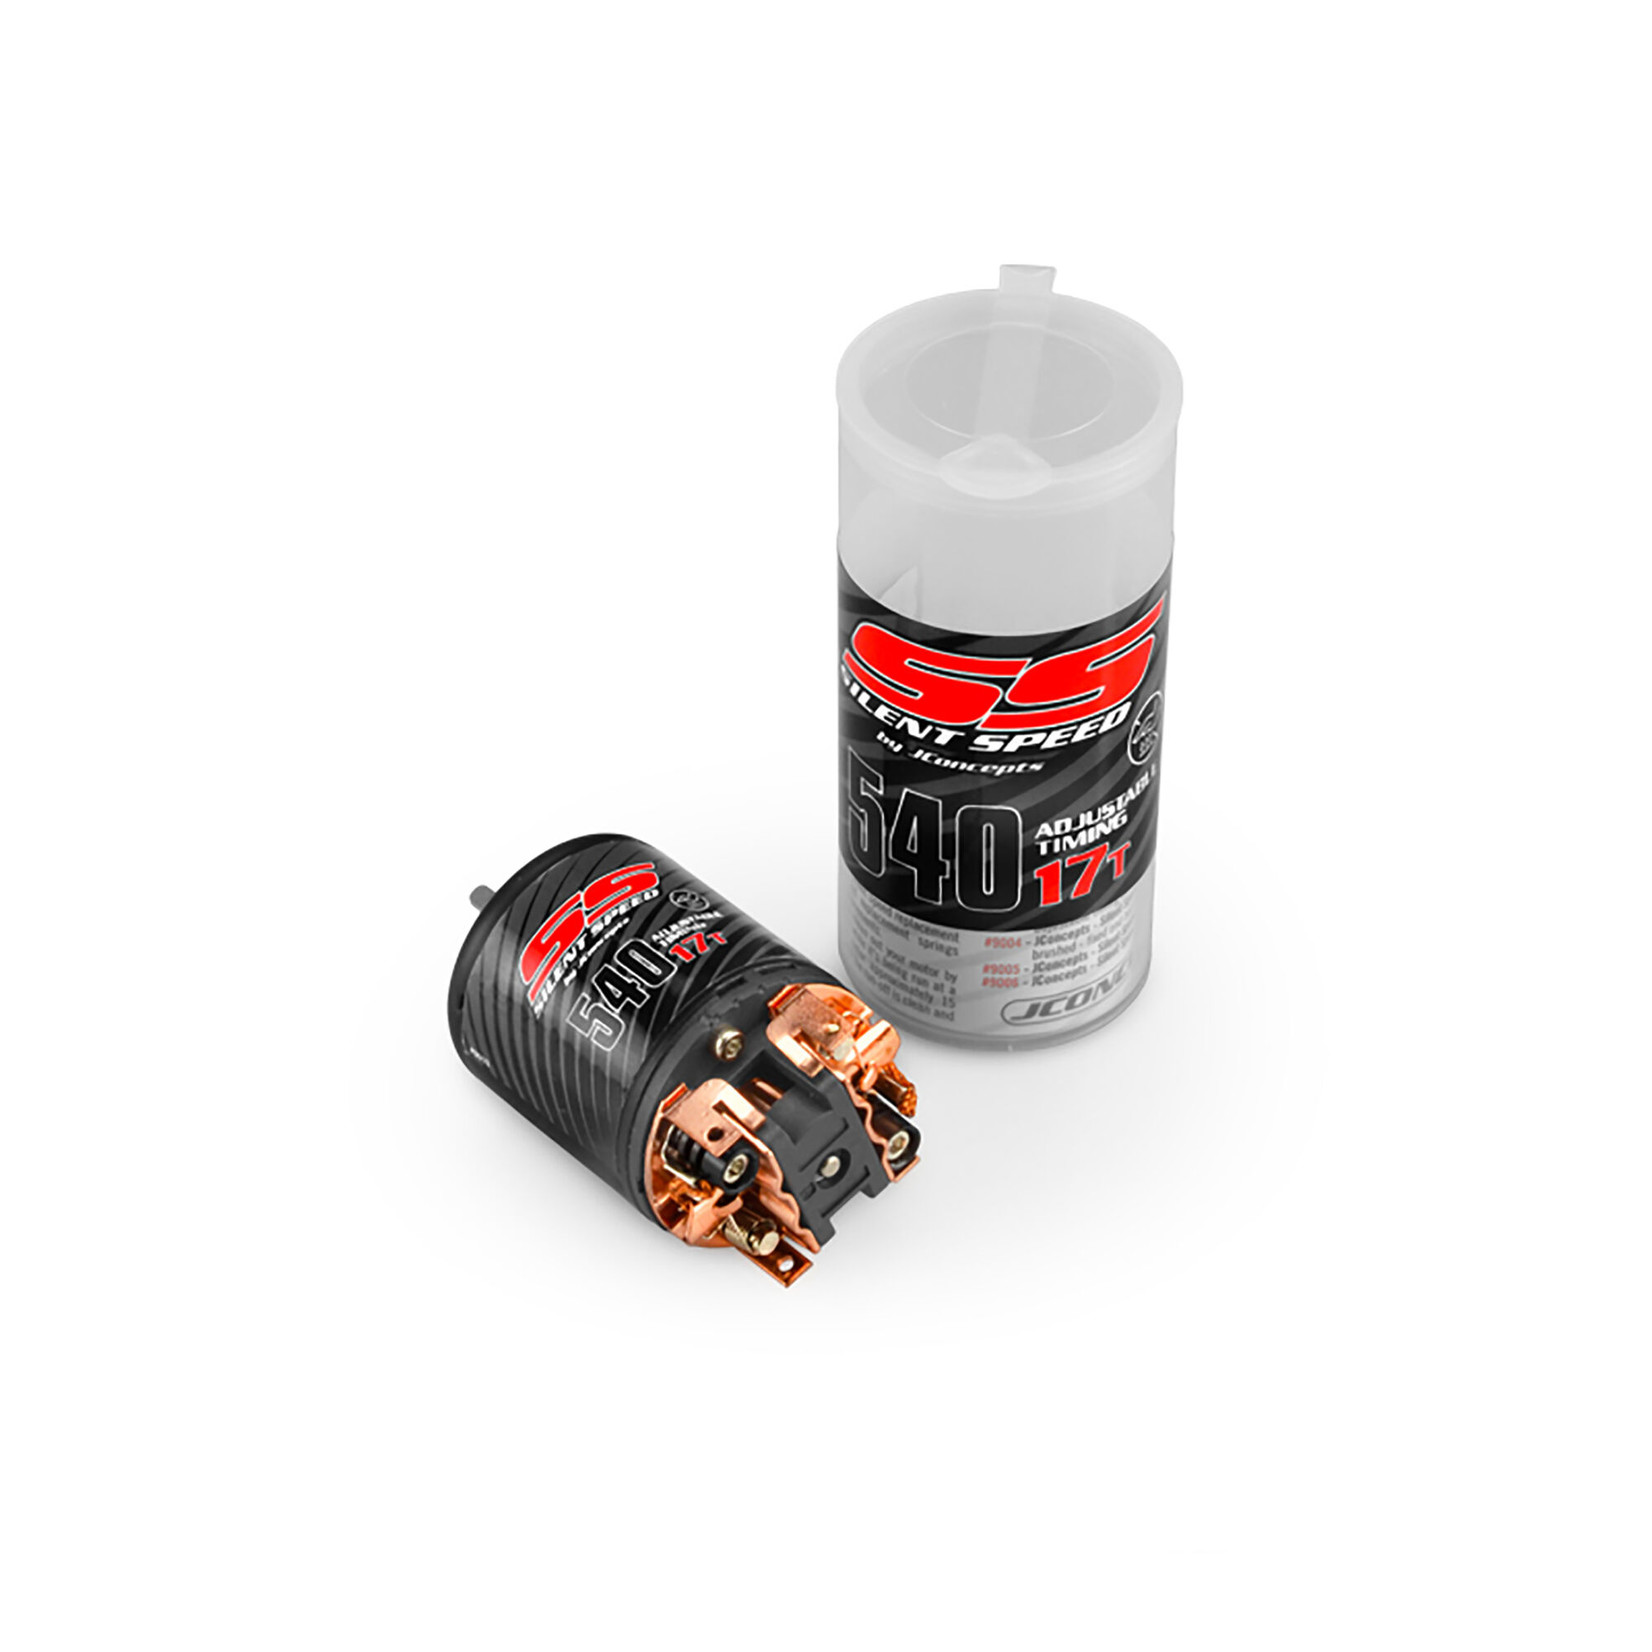 JConcepts Silent Speed Adjustable Timing Competition Motor, 17T